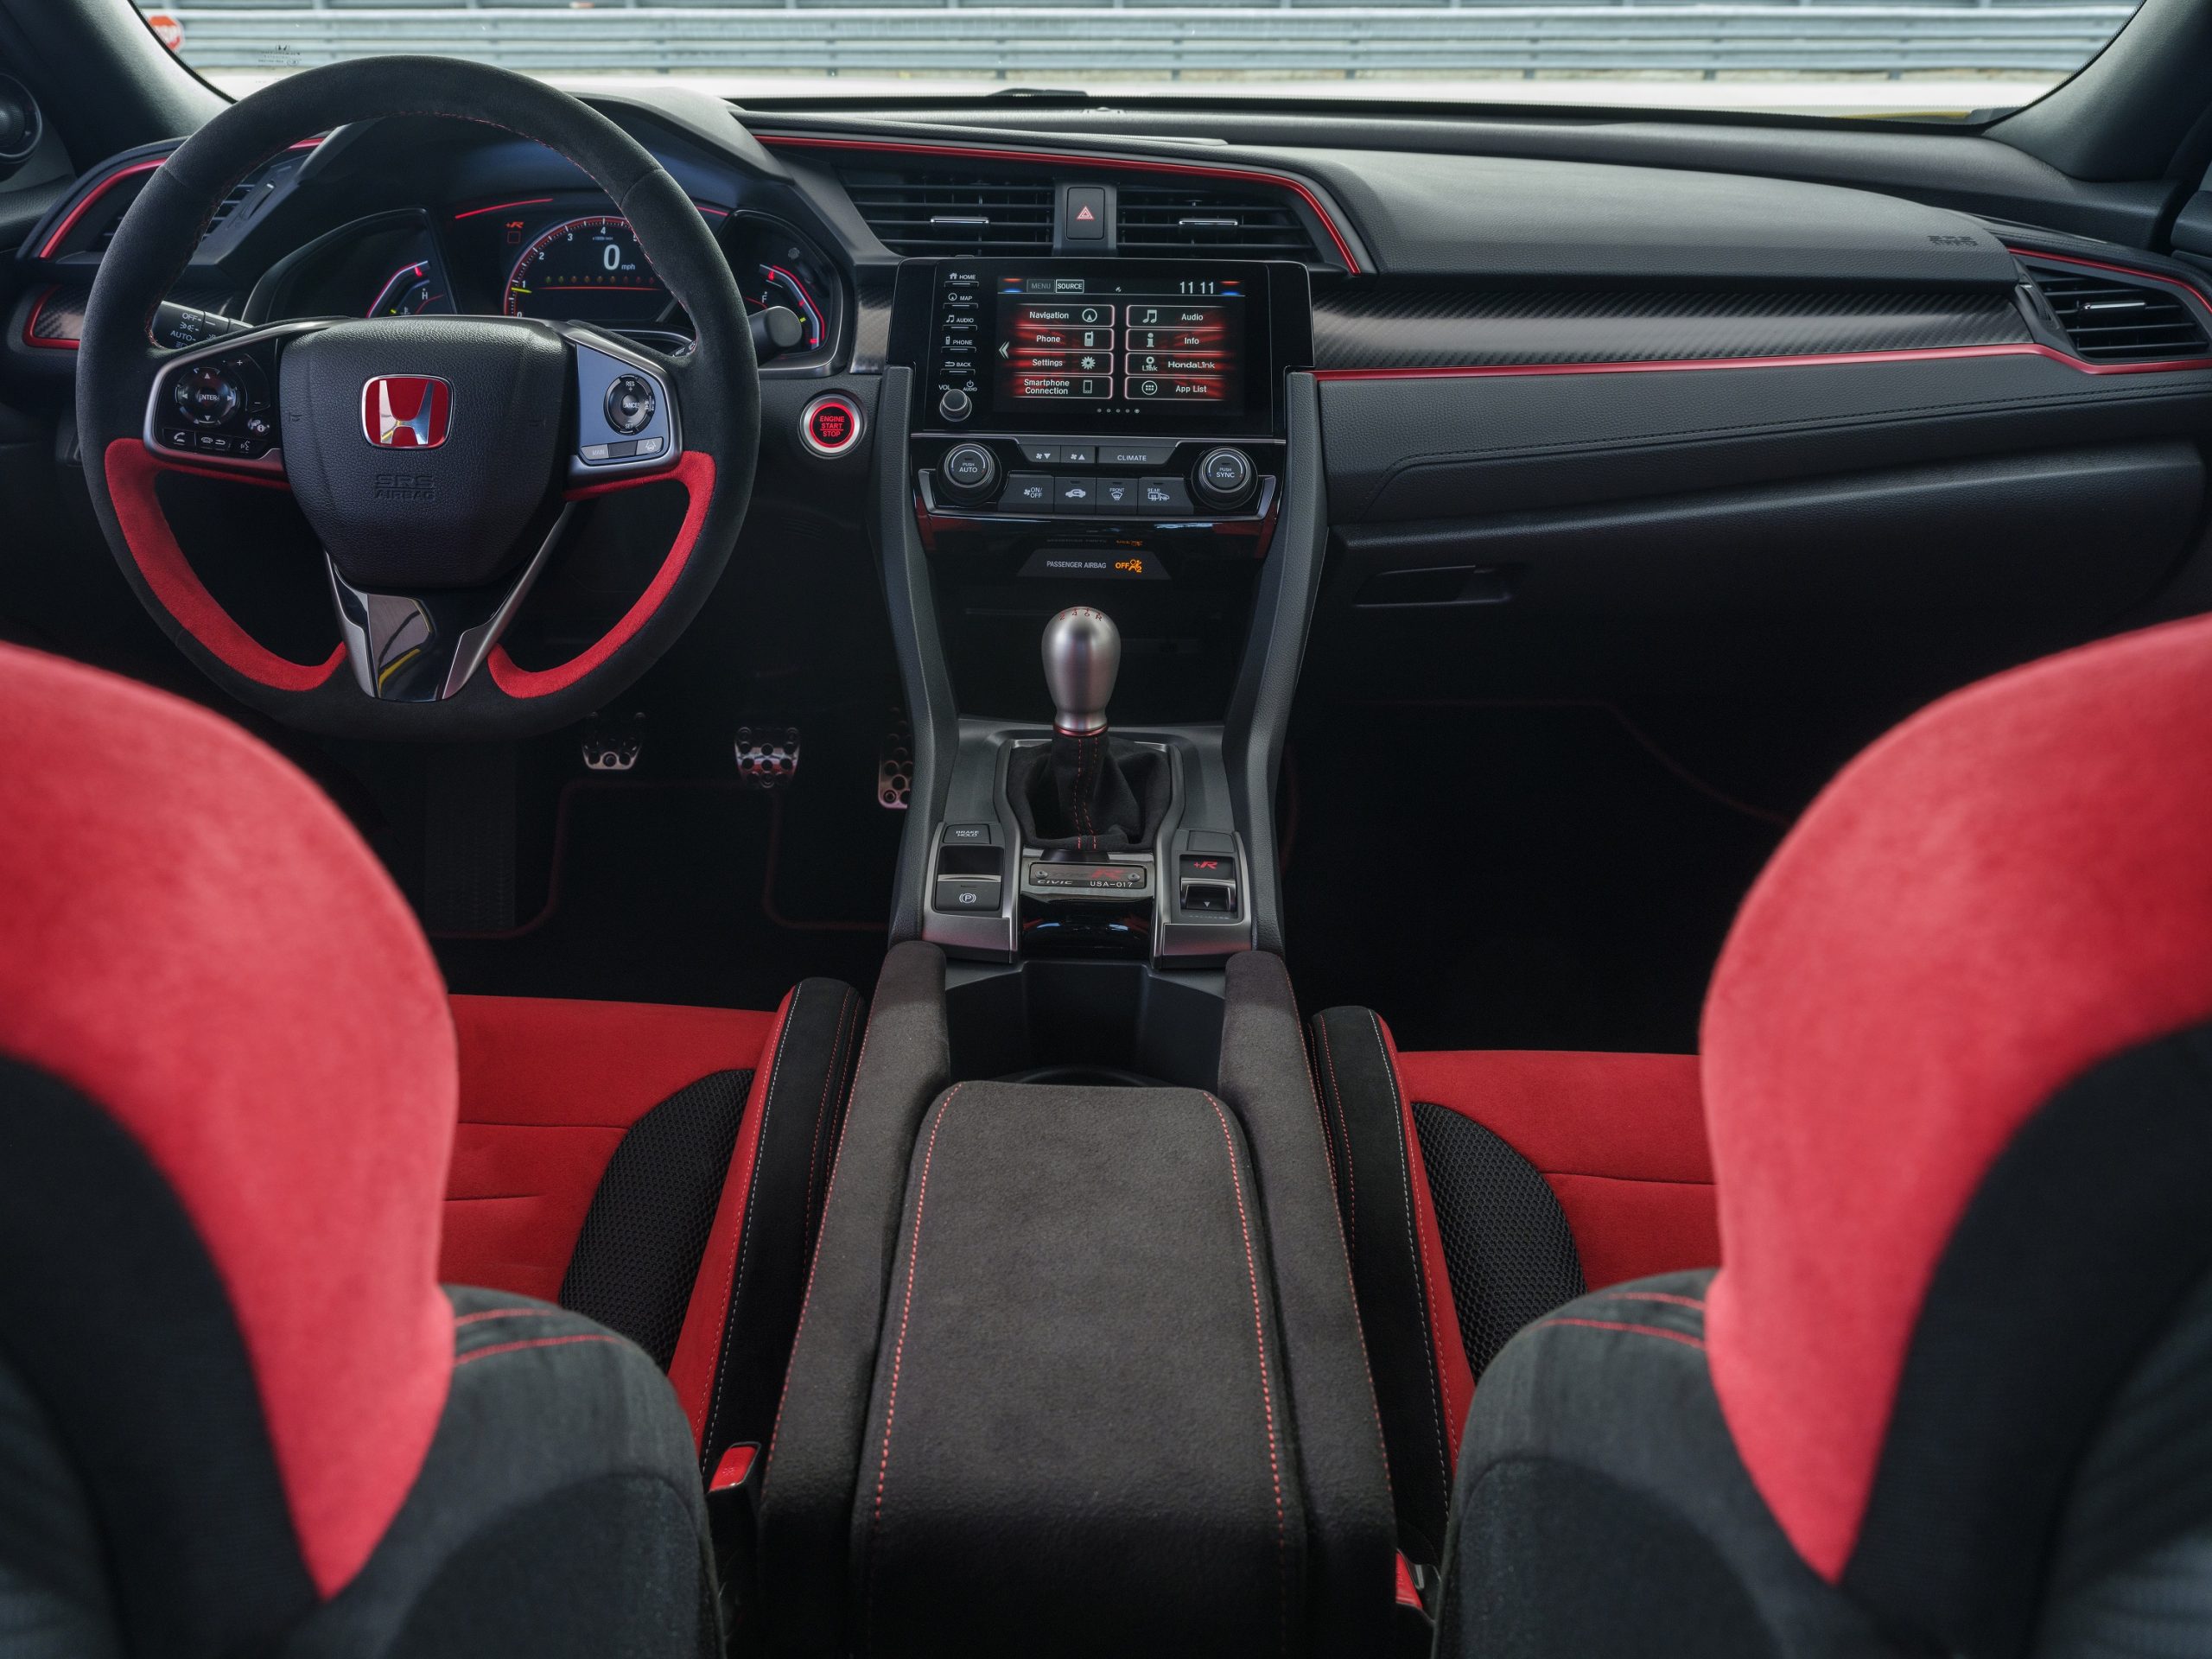 The interior of the Honda Civic Type R with red seats and a manual transmission